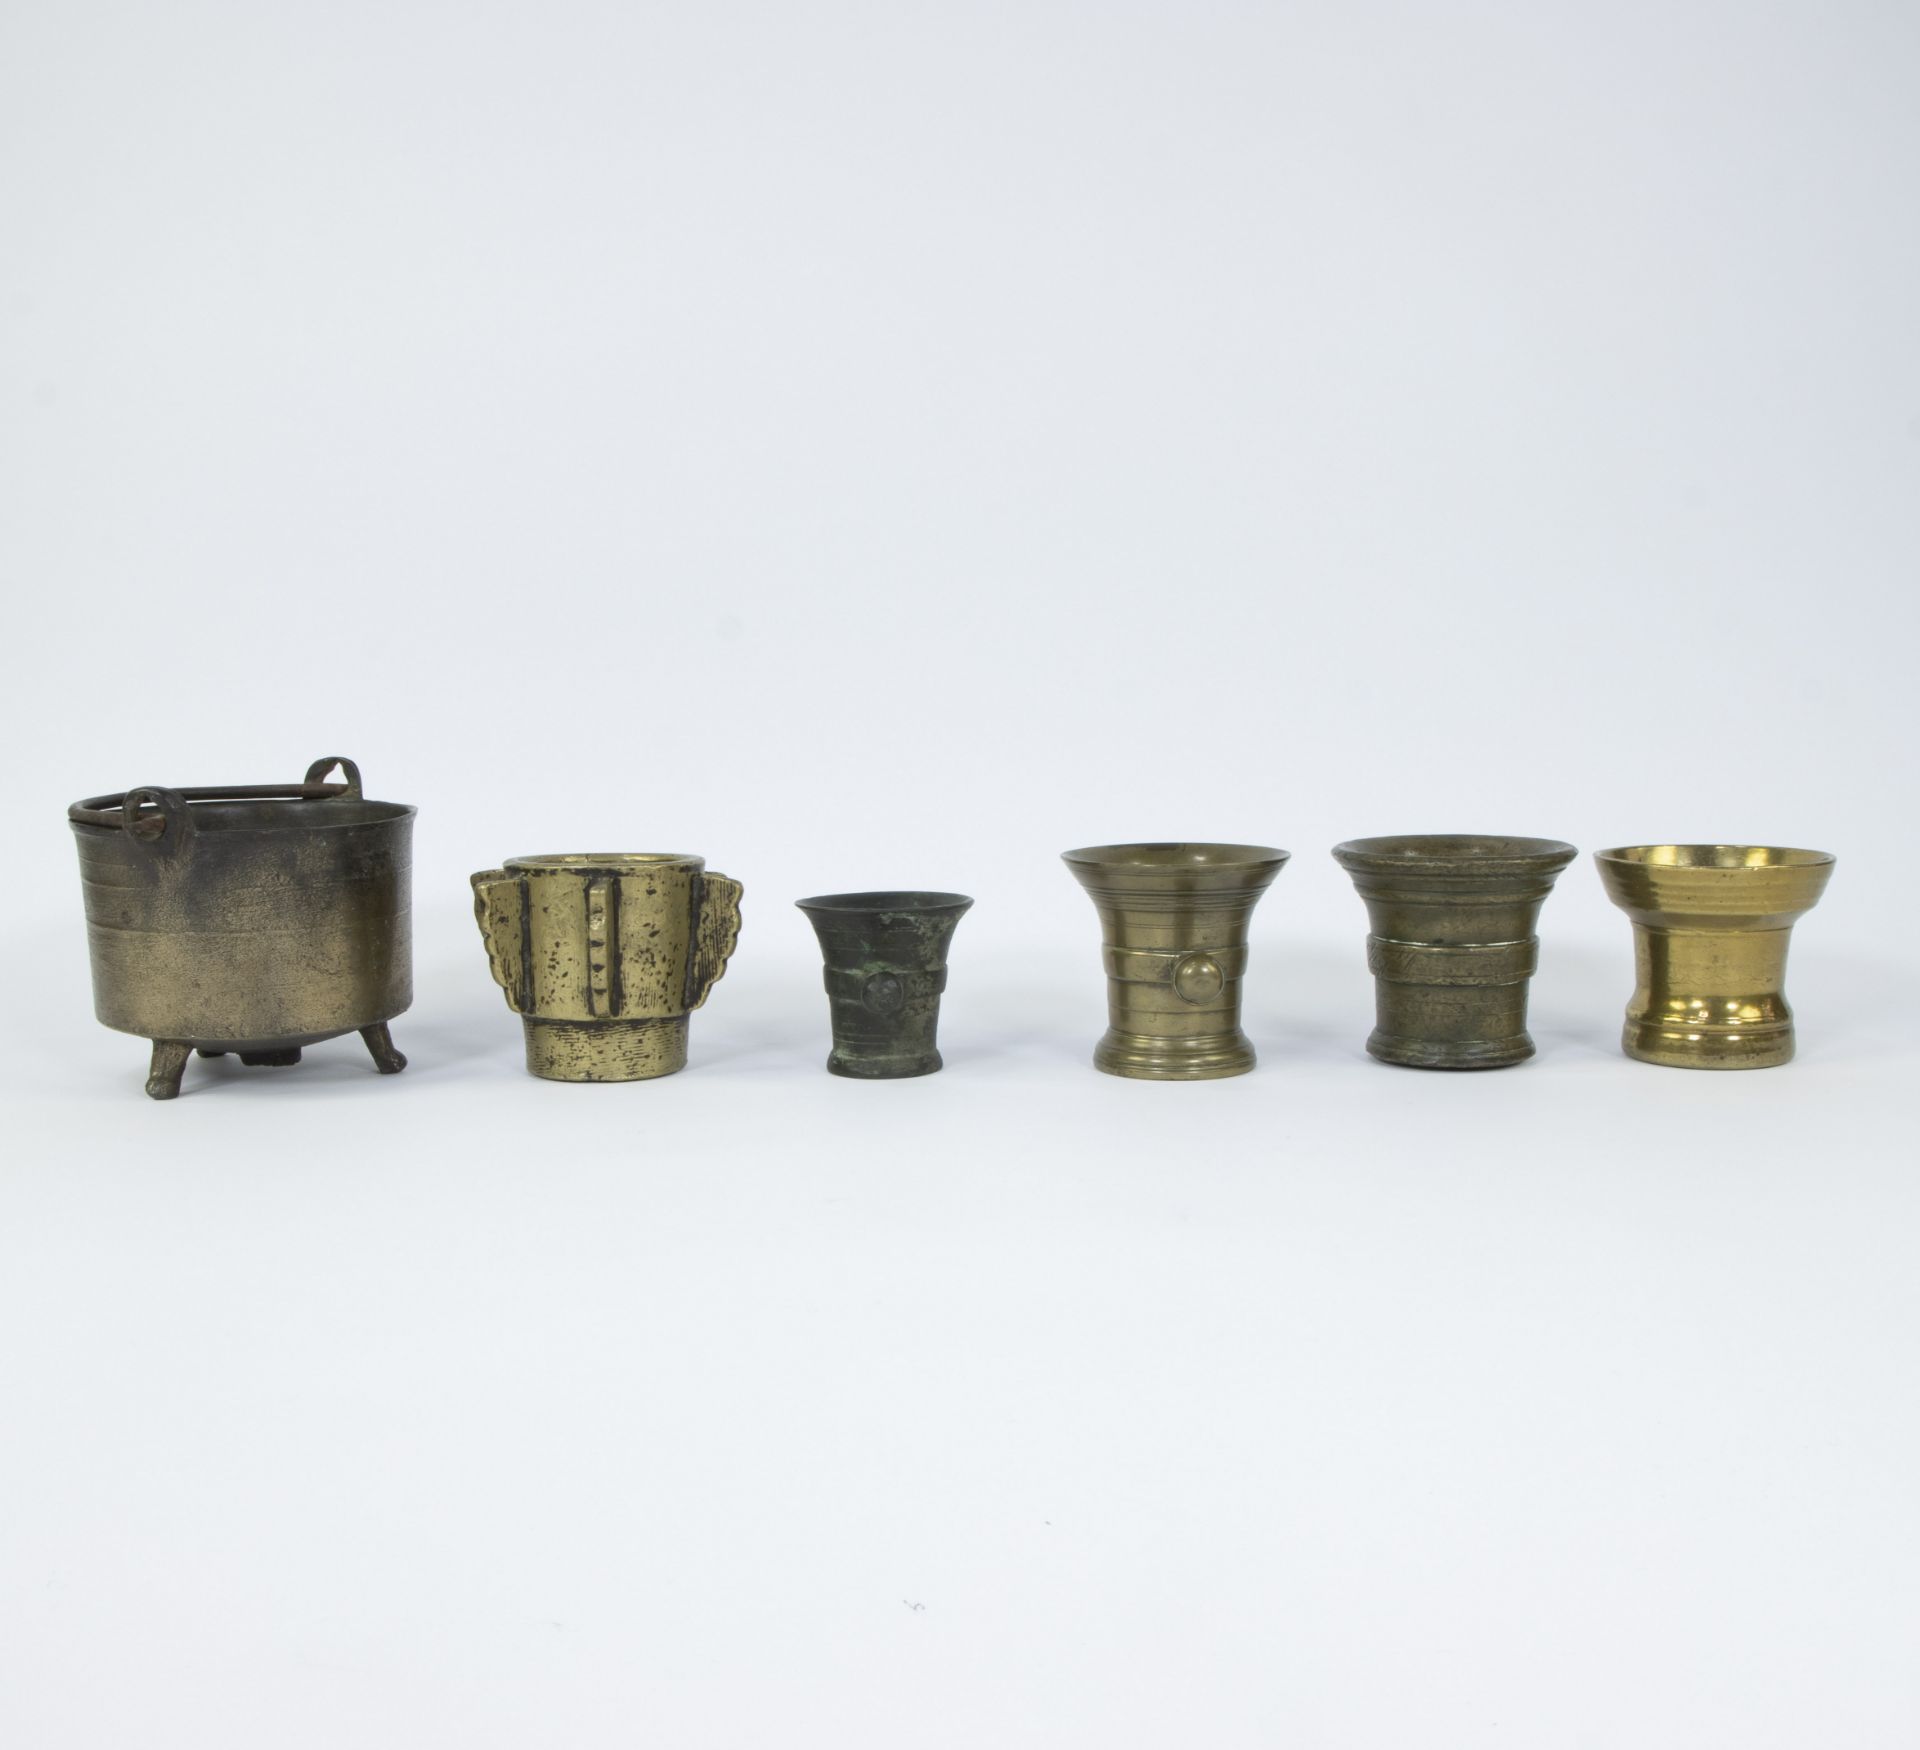 Lot of 5 mortars (17th (1), 19th (3) century), Spanish mortar and 17th century cooking pot - Image 3 of 8